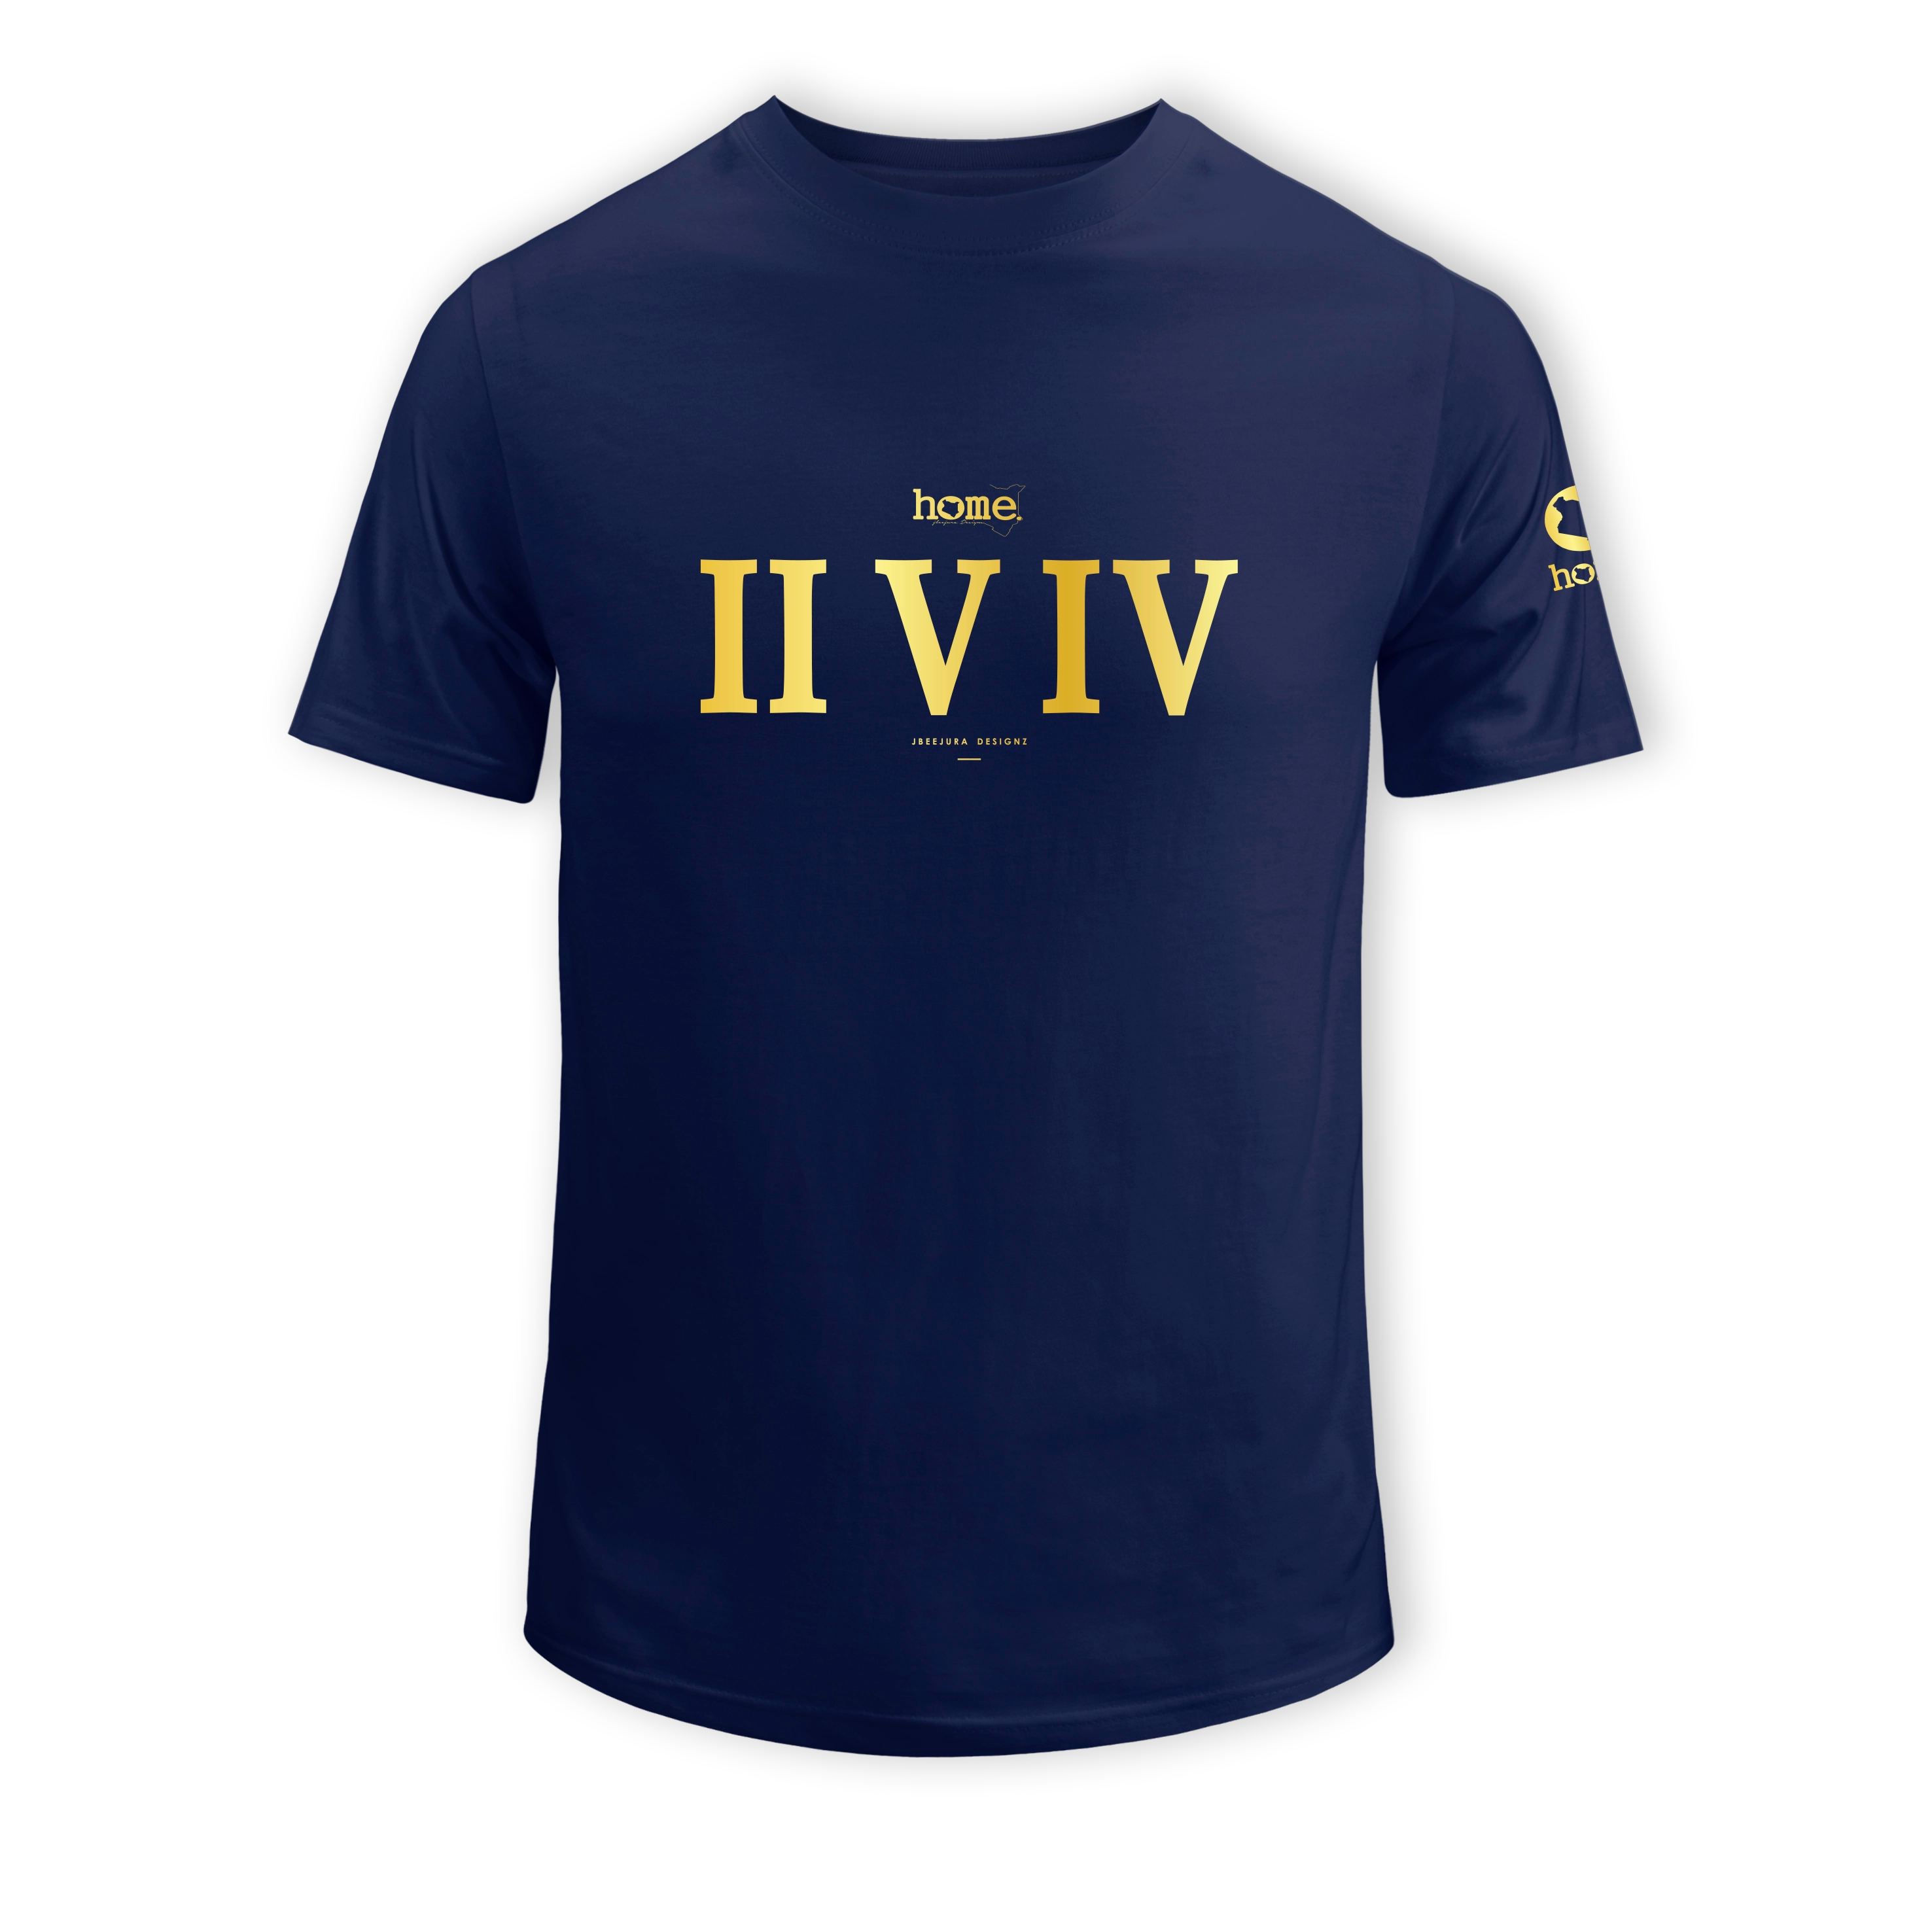 home_254 SHORT-SLEEVED NAVY BLUE T-SHIRT WITH A GOLD ROMAN NUMERALS PRINT – COTTON PLUS FABRIC